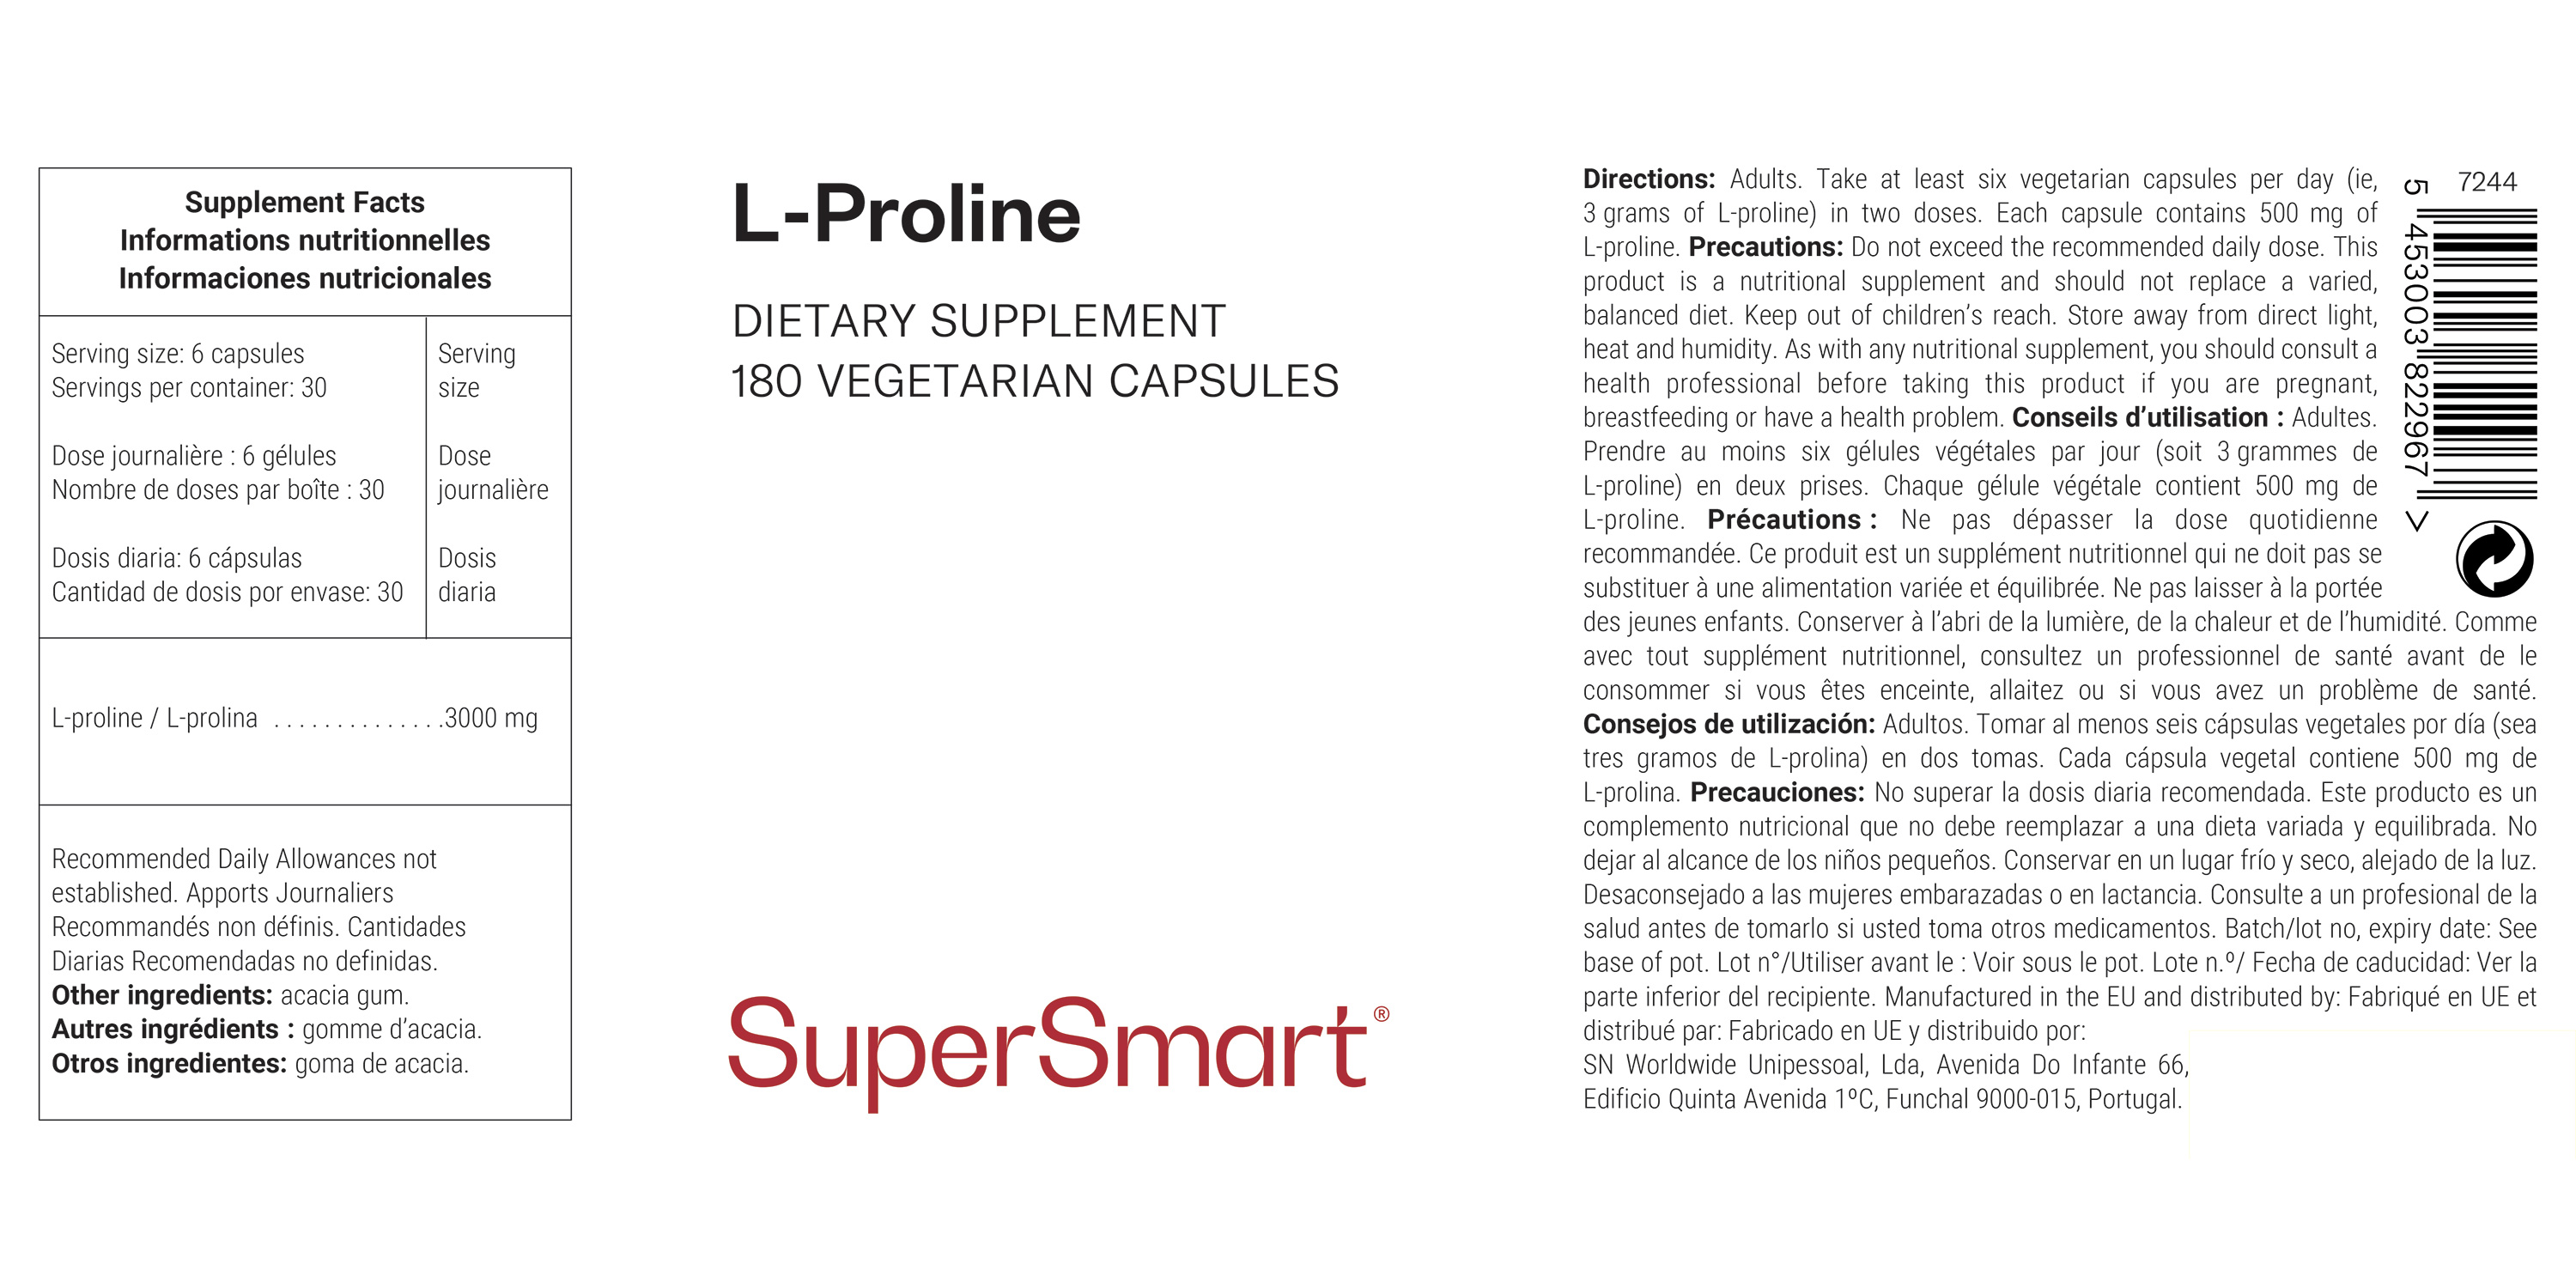 L-Proline dietary supplement, contributes to collagen production